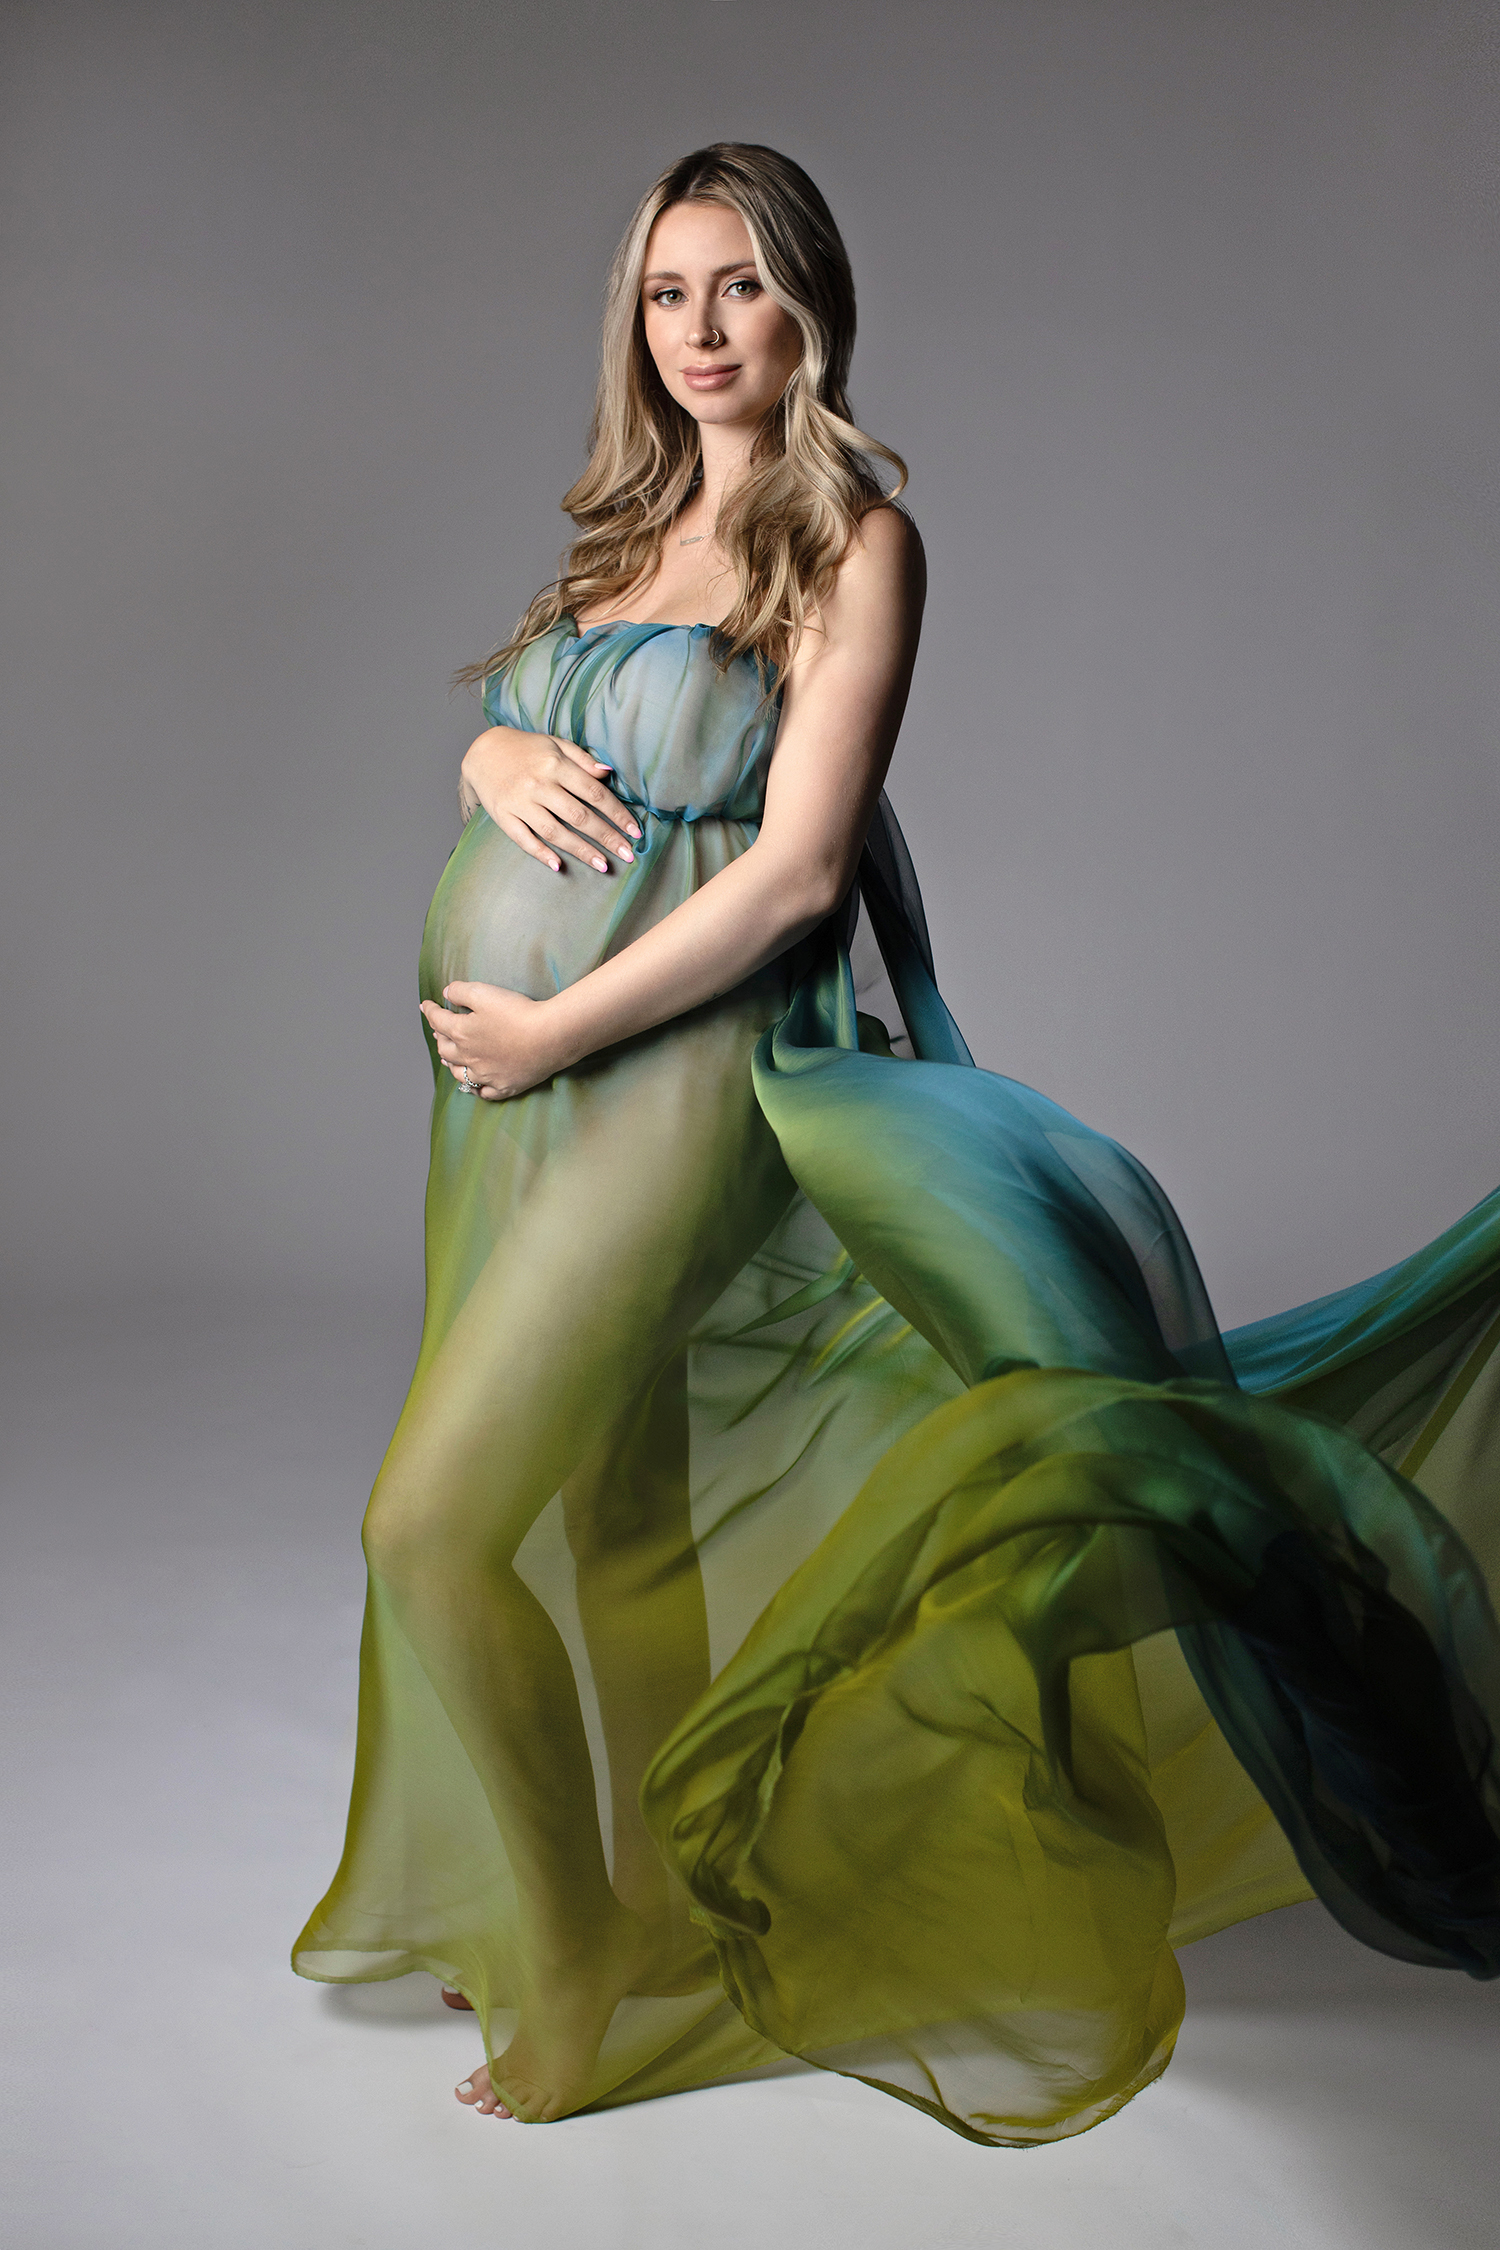 A photograph of a glamorous mom-to-be, embraced by the soft fabrics of an exquisite gown, radiating luxury and grace in her maternity photoshoot.